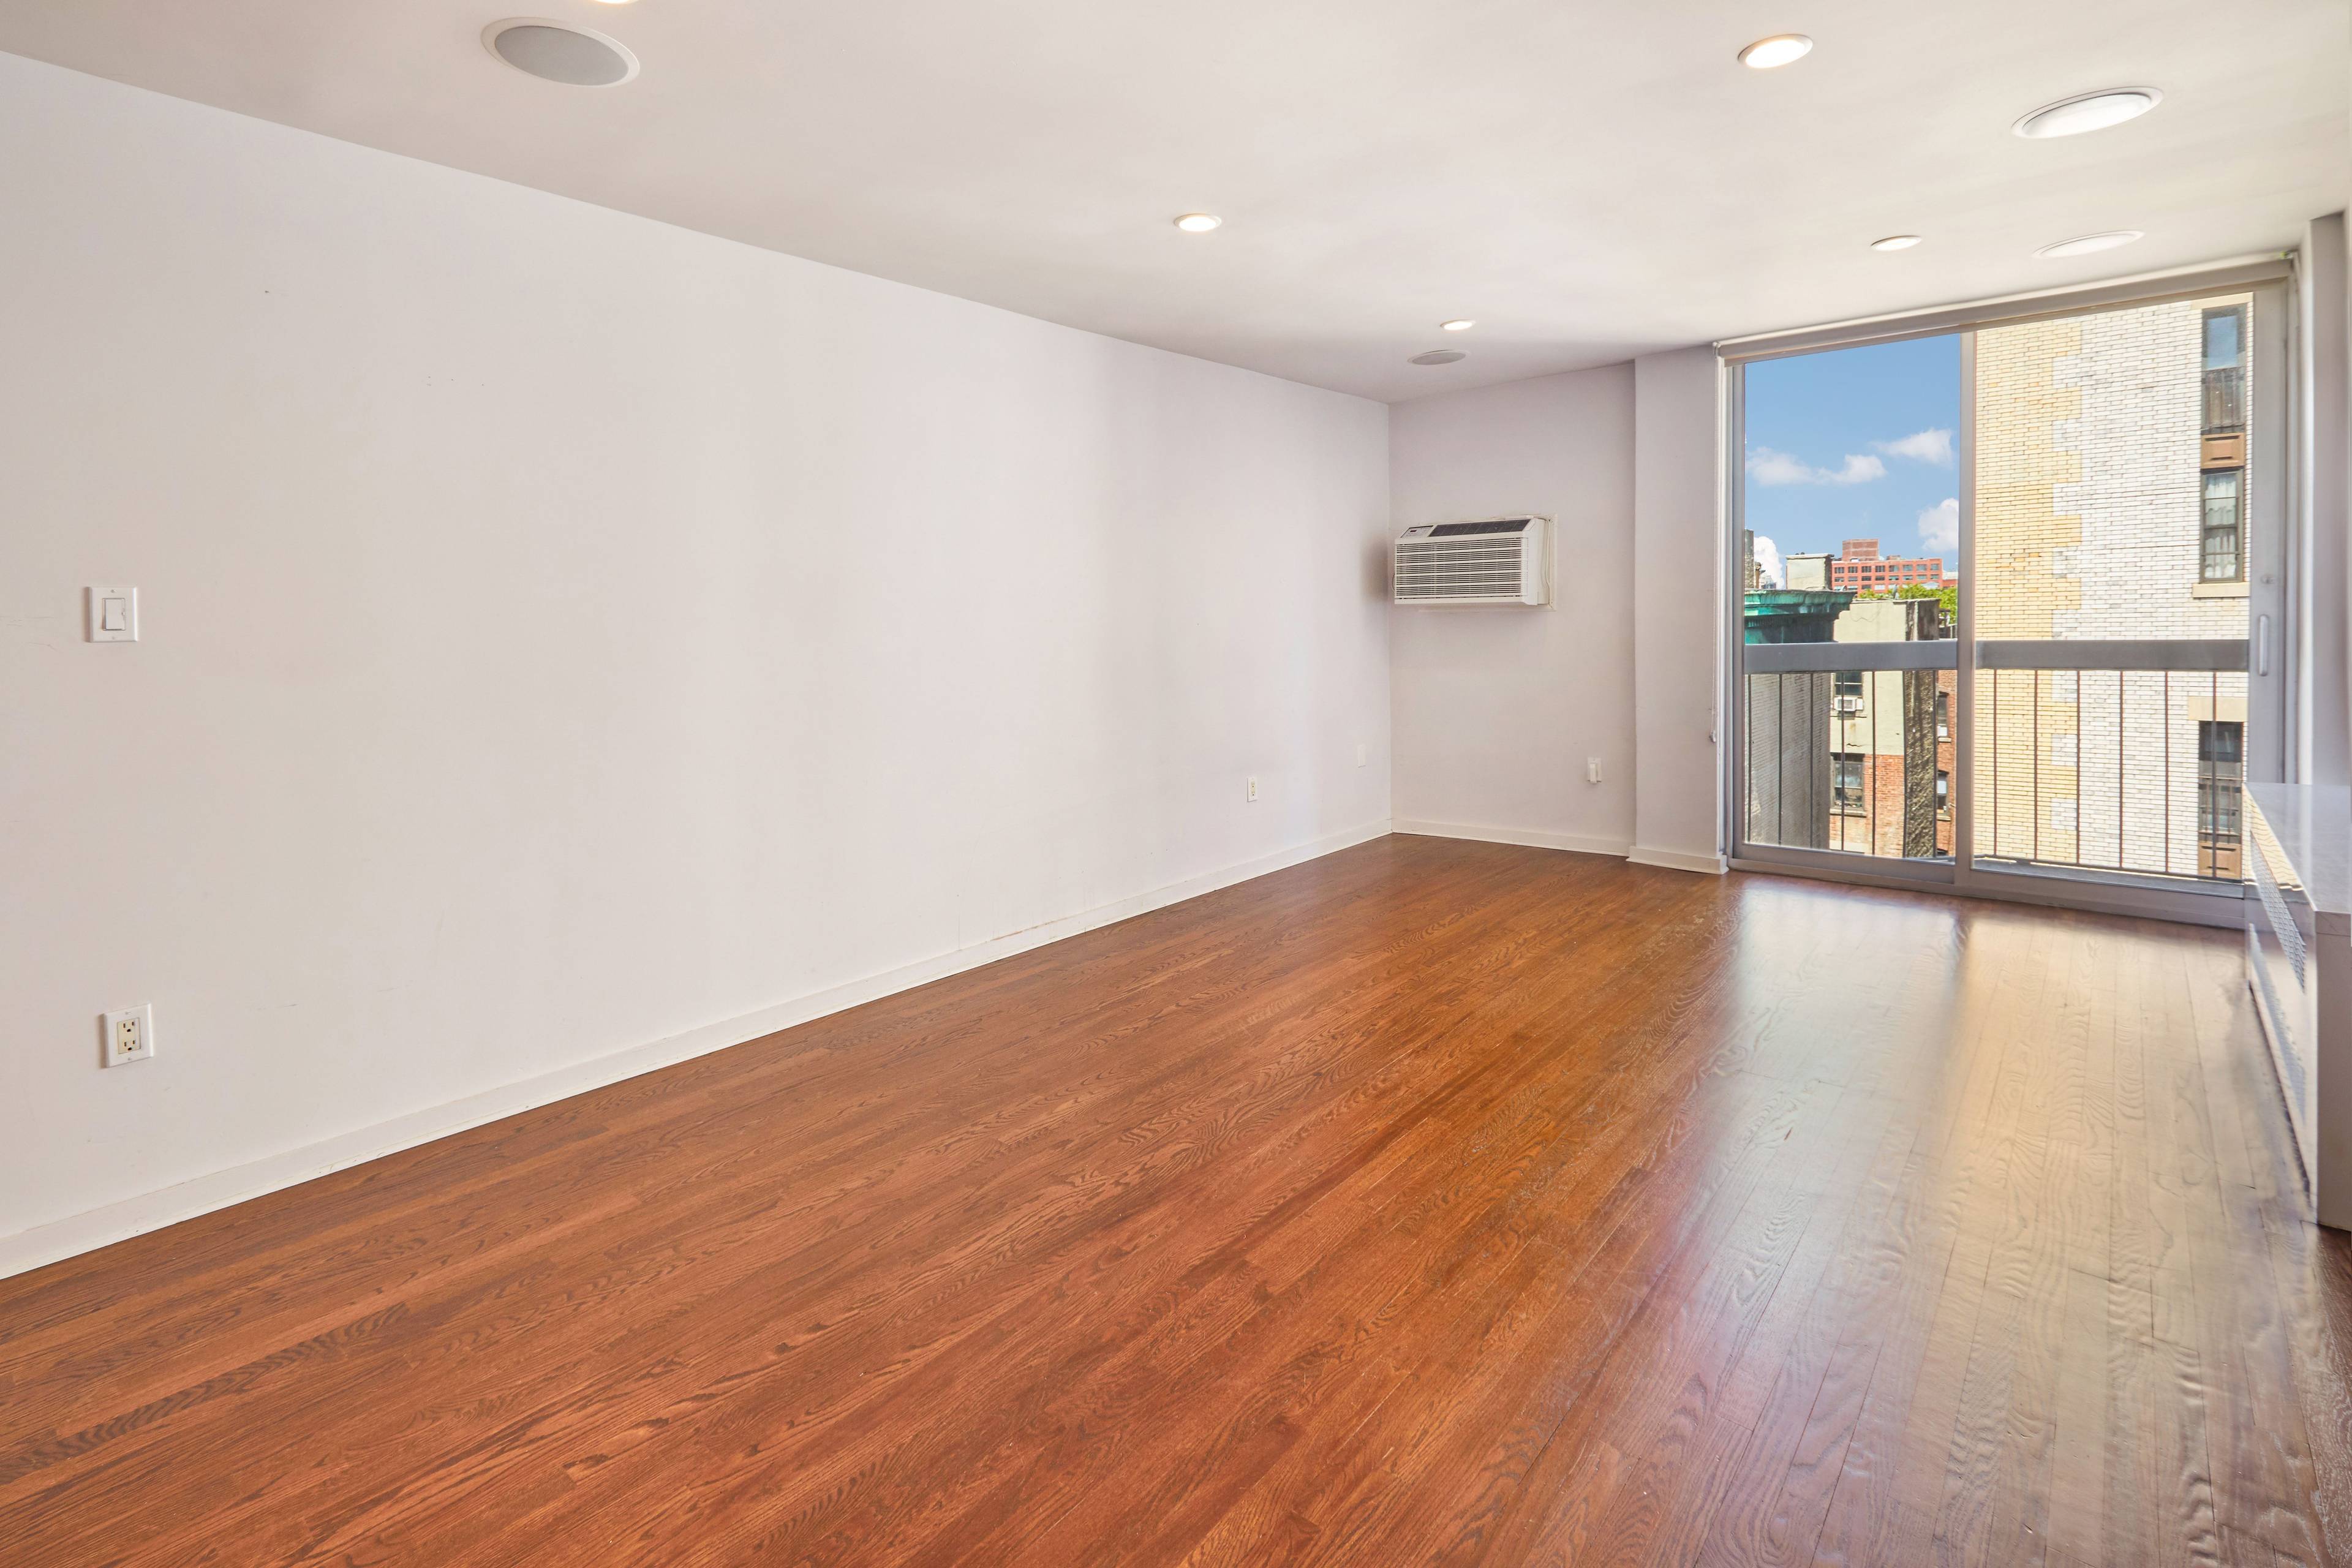 Live in the very center of historic Greenwich Village !